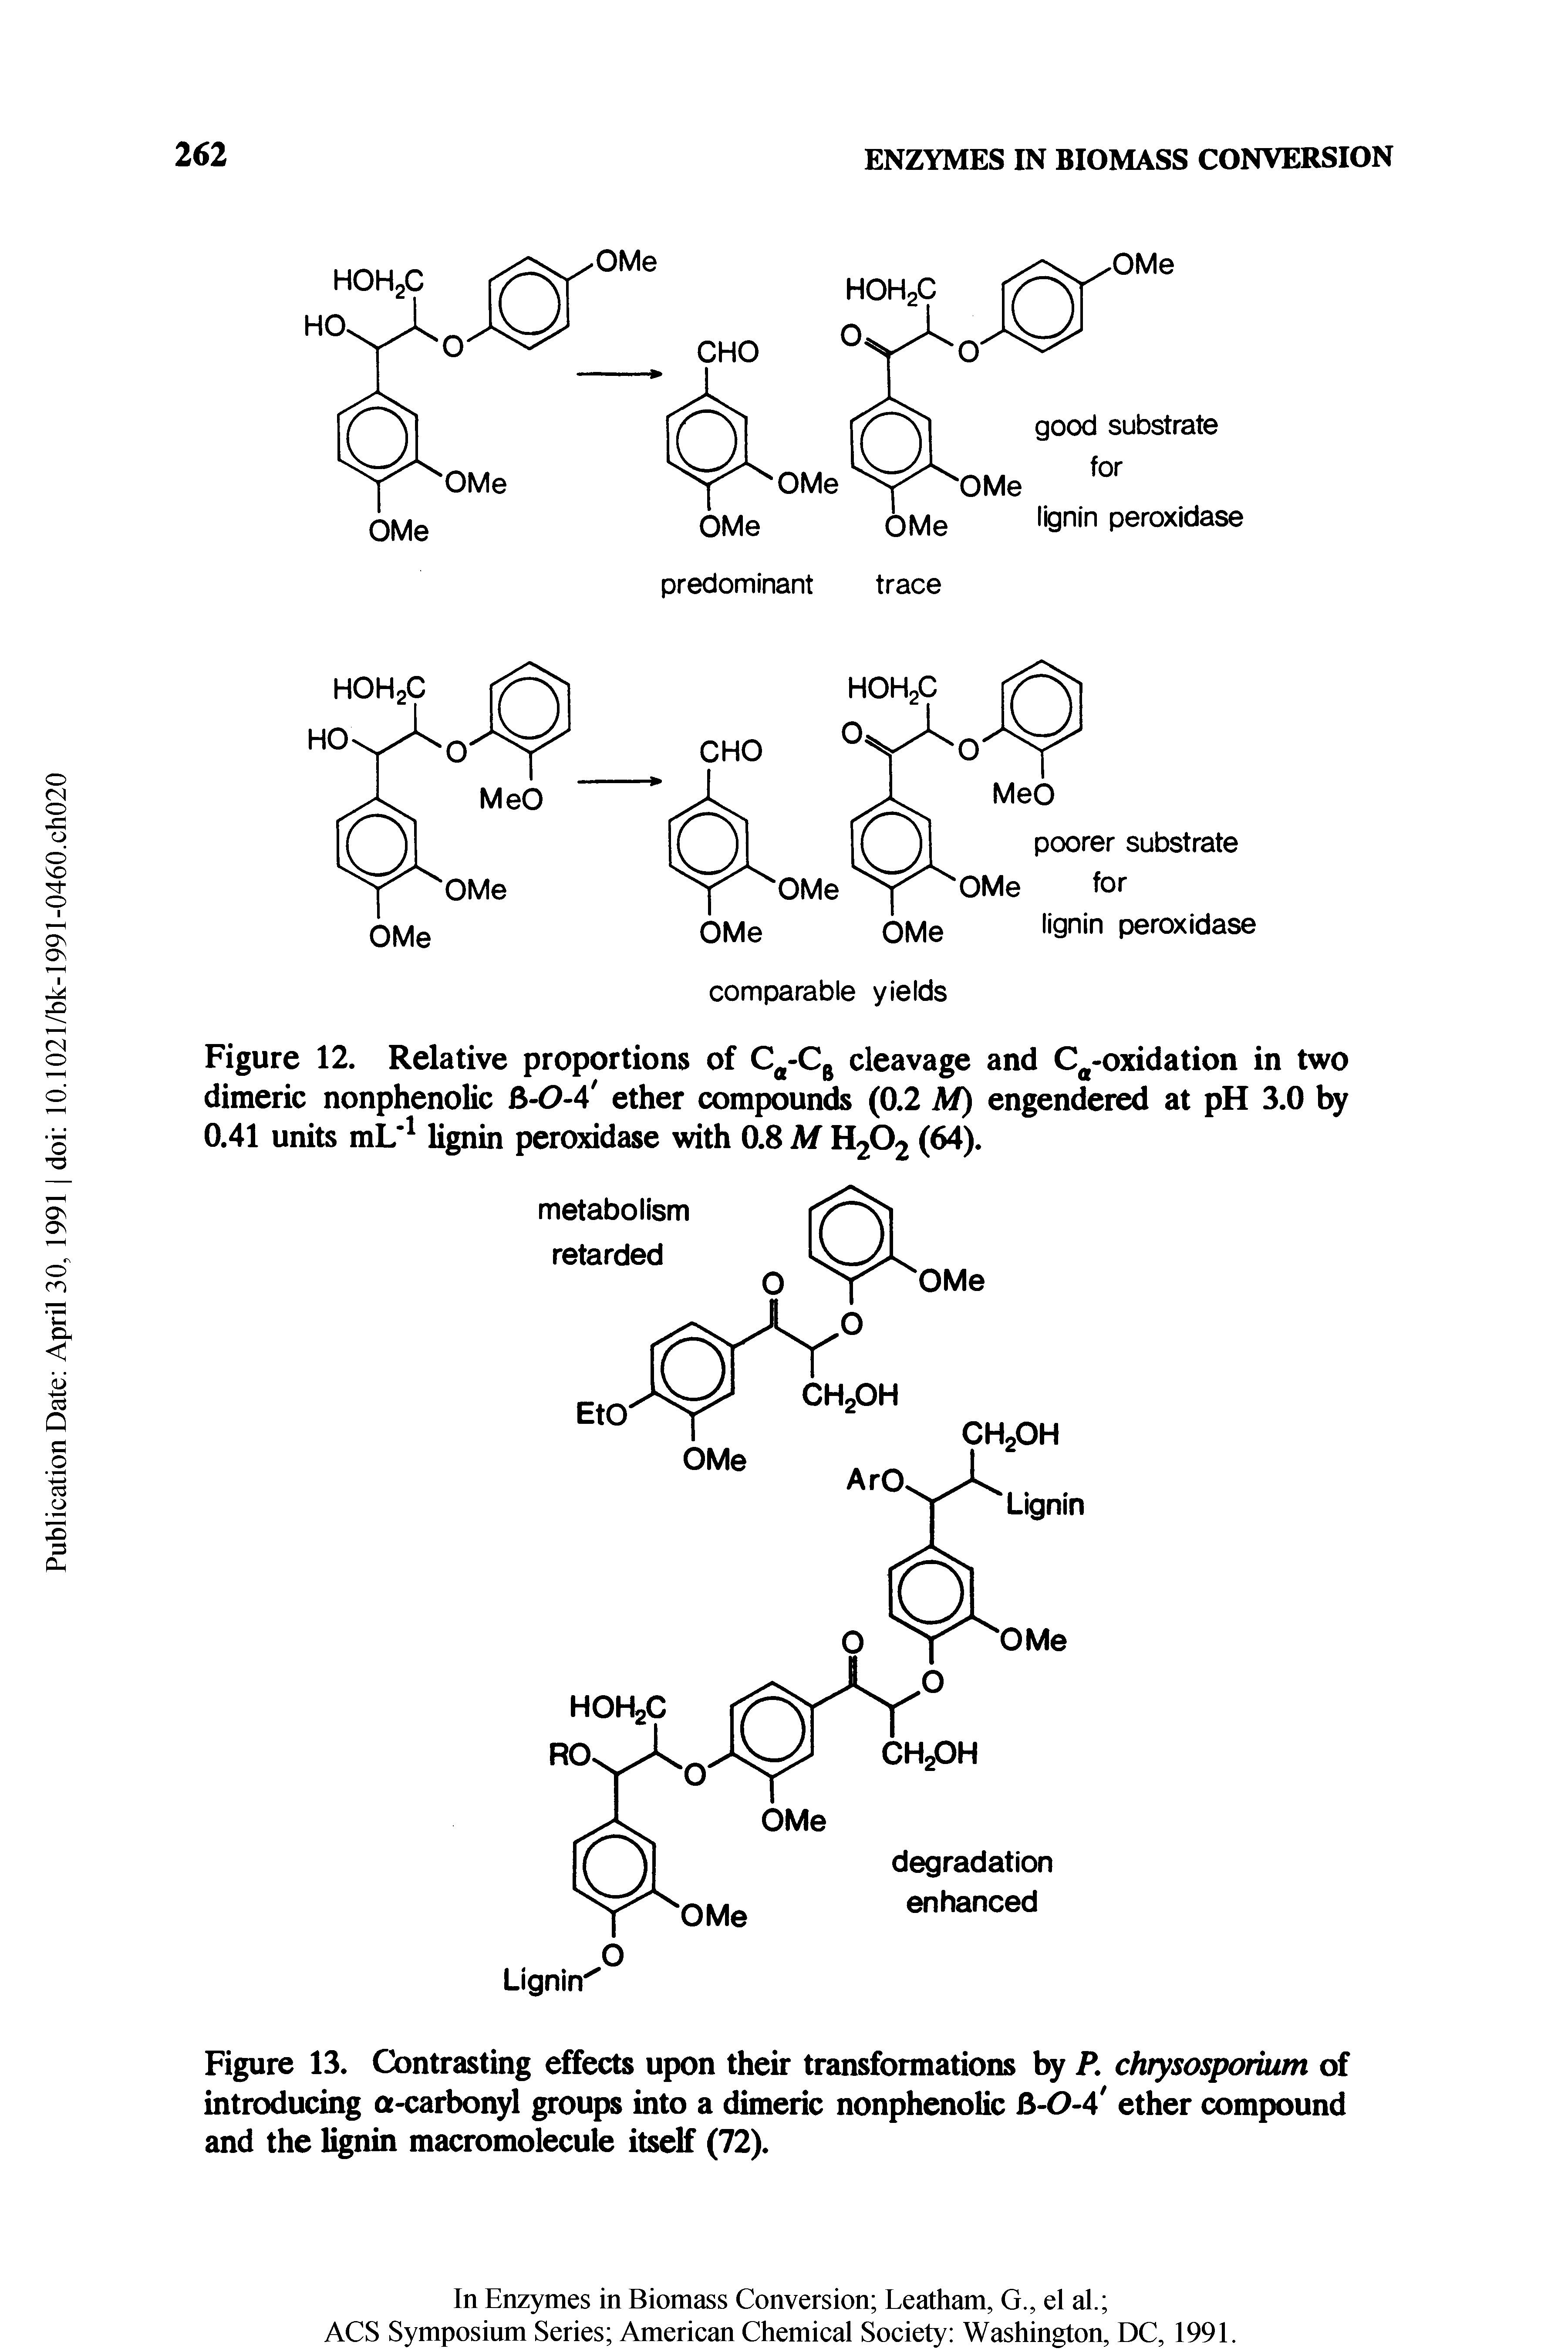 Figure 13. Contrasting effects upon their transformations by P. chrysosporium of introducing a-carbonyl groups into a dimeric nonphenolic 3-0-4 ether compound and the lignin macromolecule itself (72).